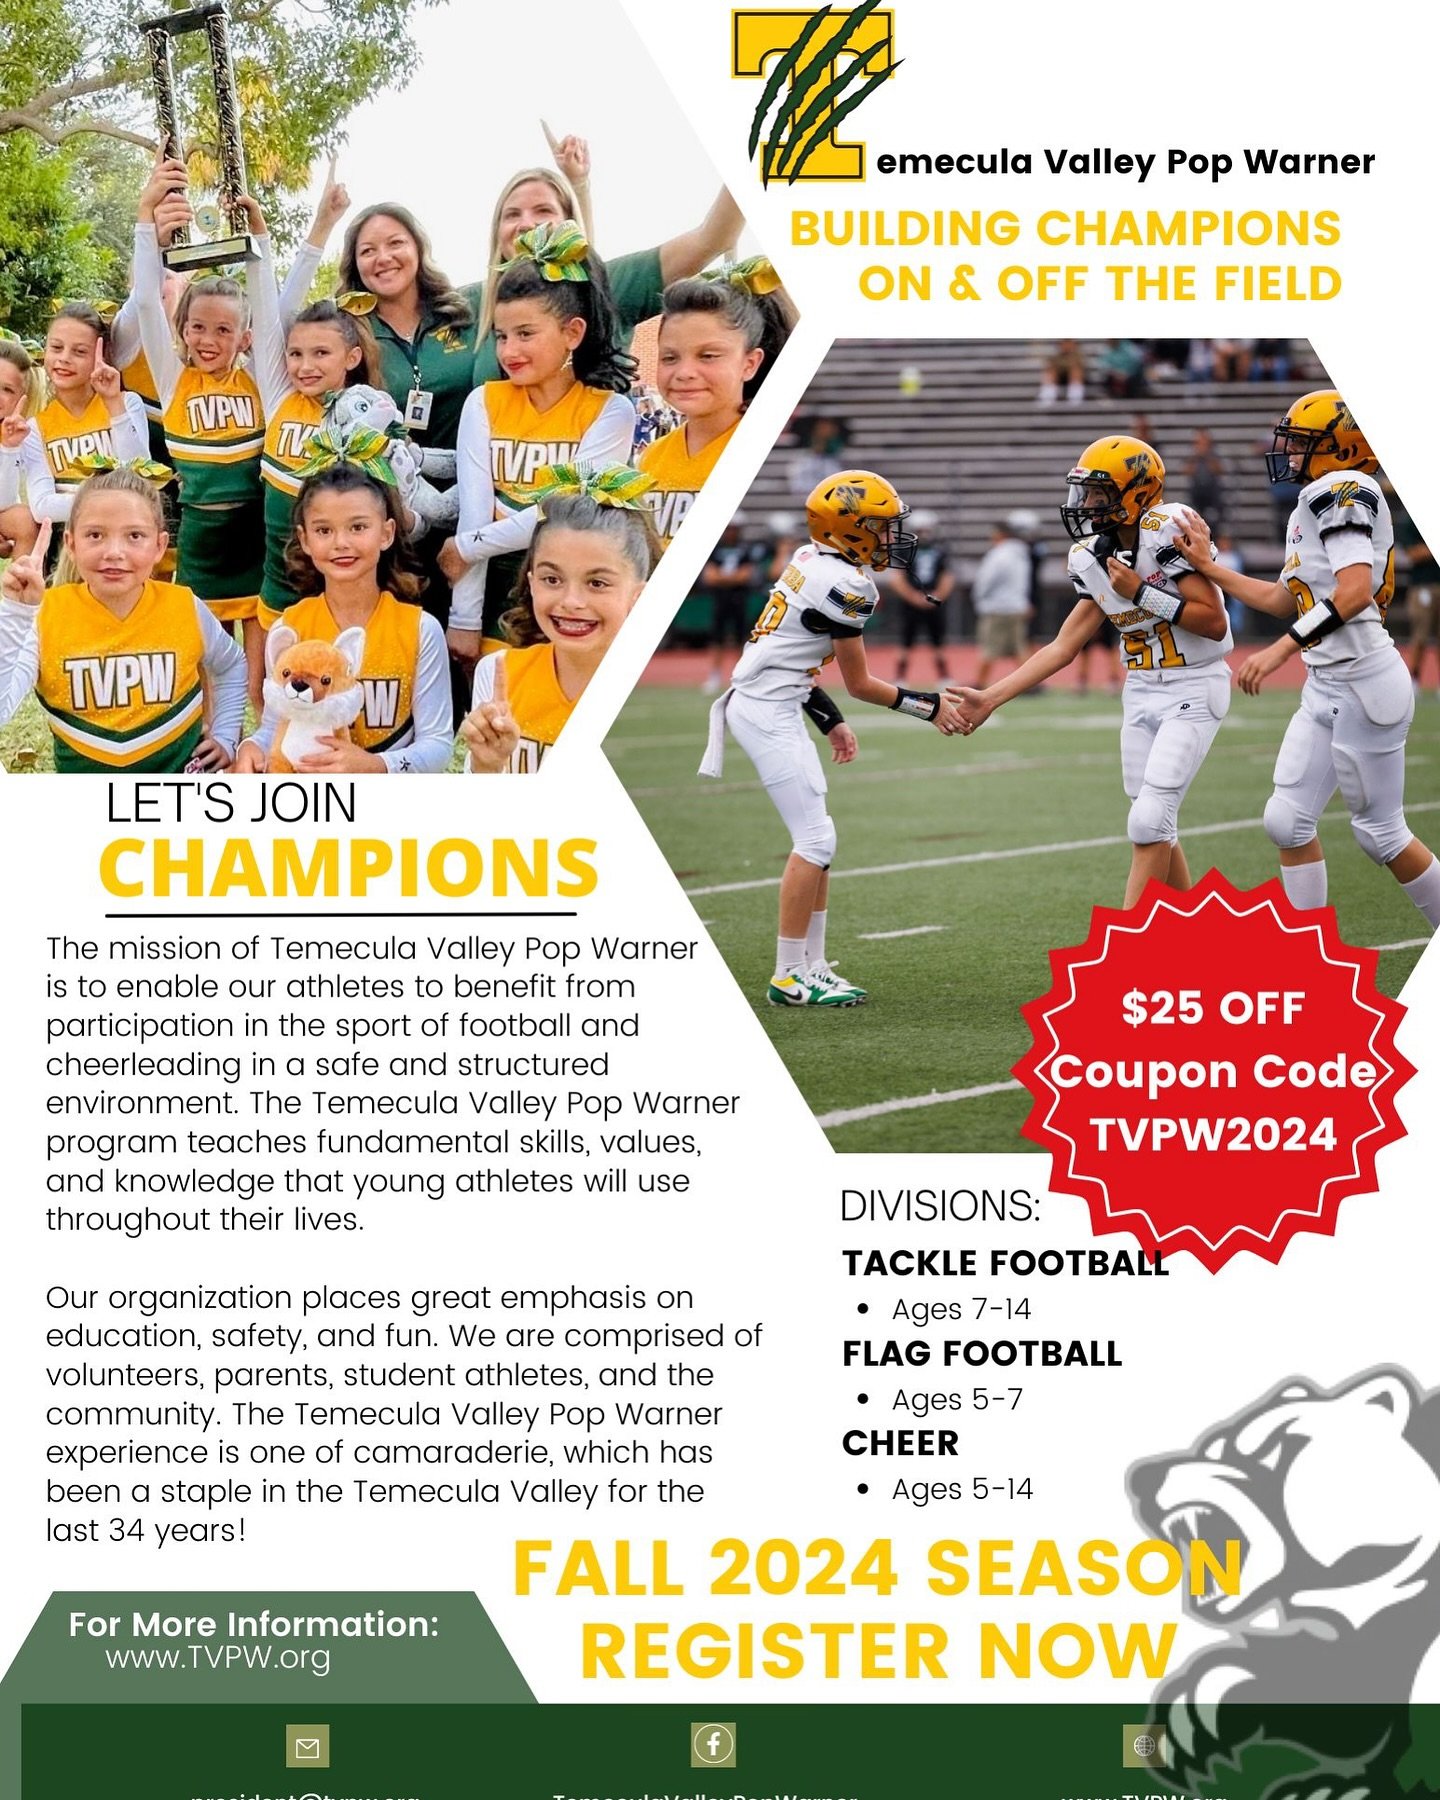 Building champions on and off the field! Join our incredible TVPW Youth Football and Cheer community today!!! 🏈📣 #TVPW #Football #Cheerleading #Community @wccpopwarner @popwarnerlittlescholars @wesconregionpopwarner @saveyouthfootballcalifornia @ci